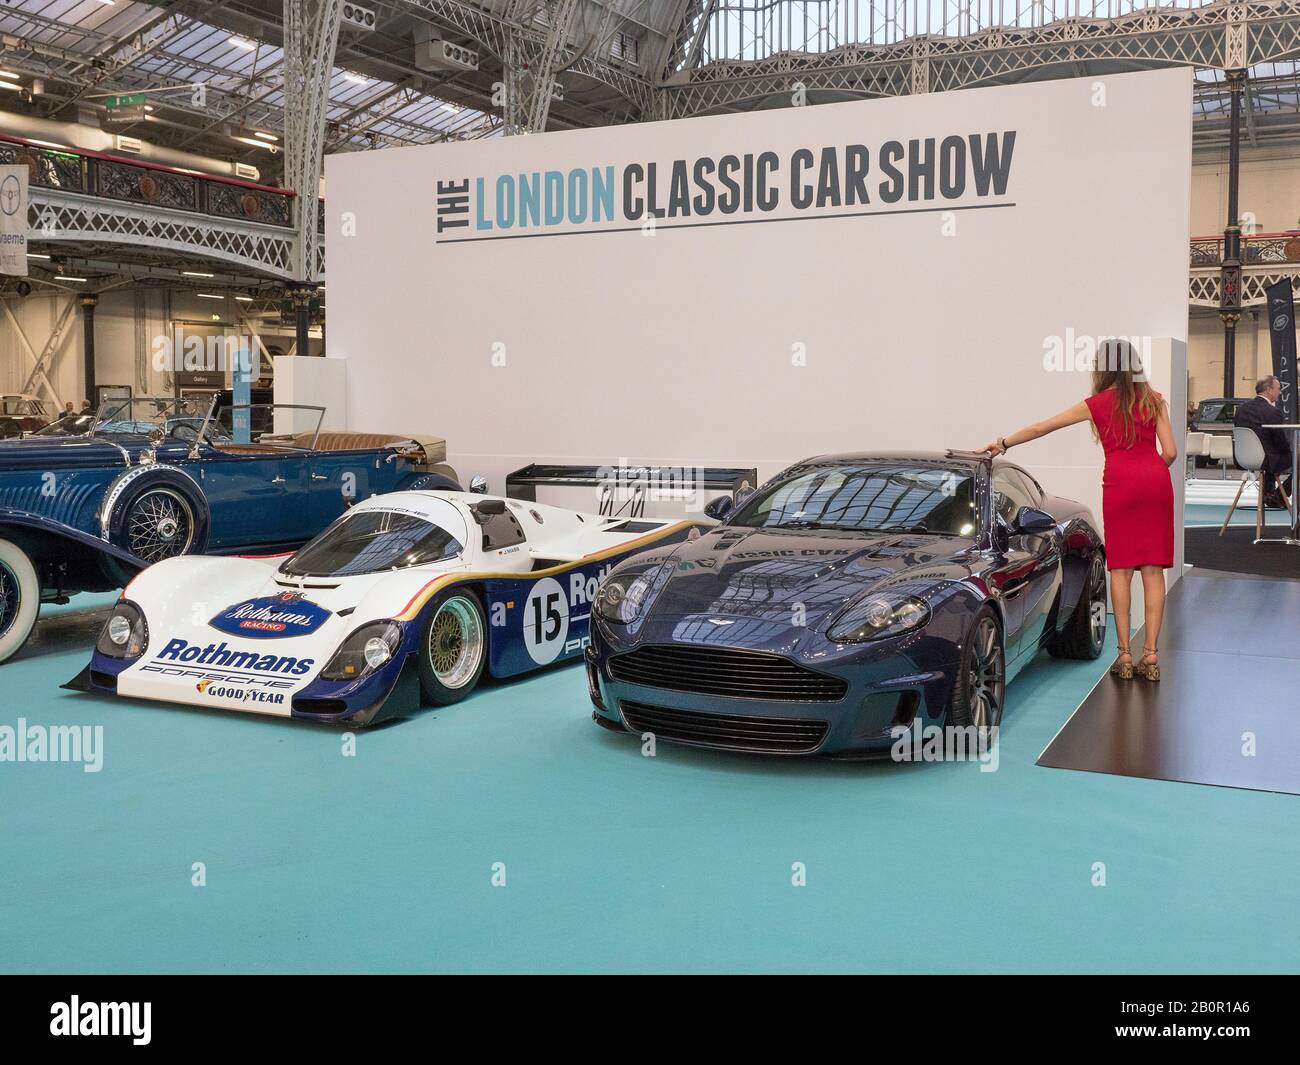 The London Classic Car Show at Olympia London UK 20/02/2020 Stock Photo